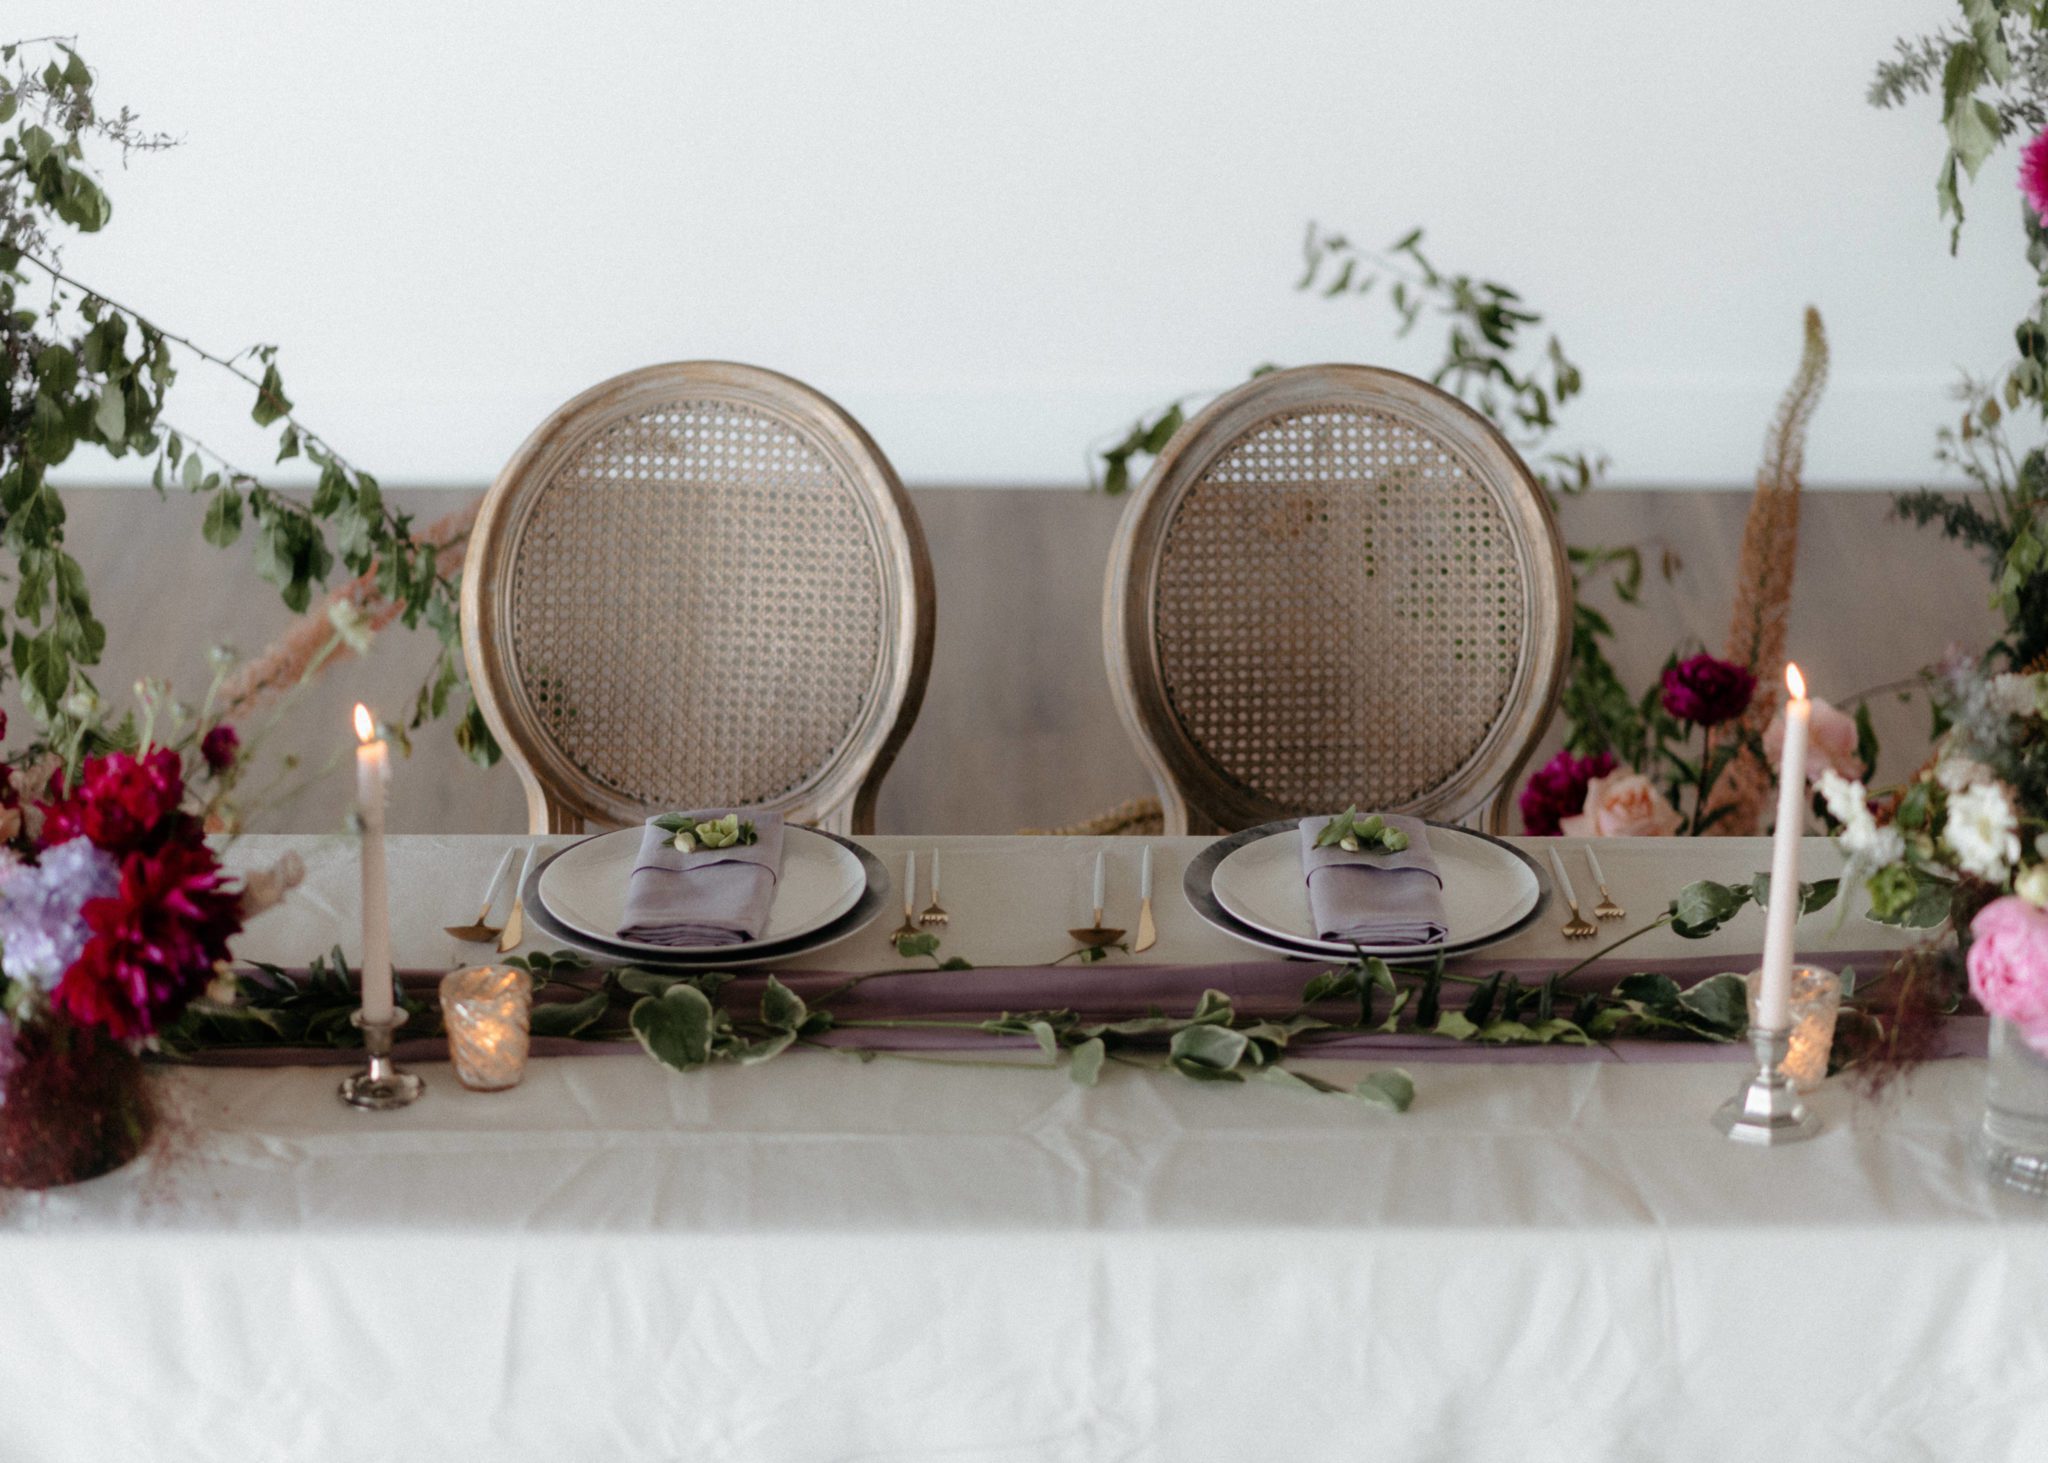 The Perfect Fall Pairing of Plum and Olive Hues in this Wallace Venue Wedding Inspiration